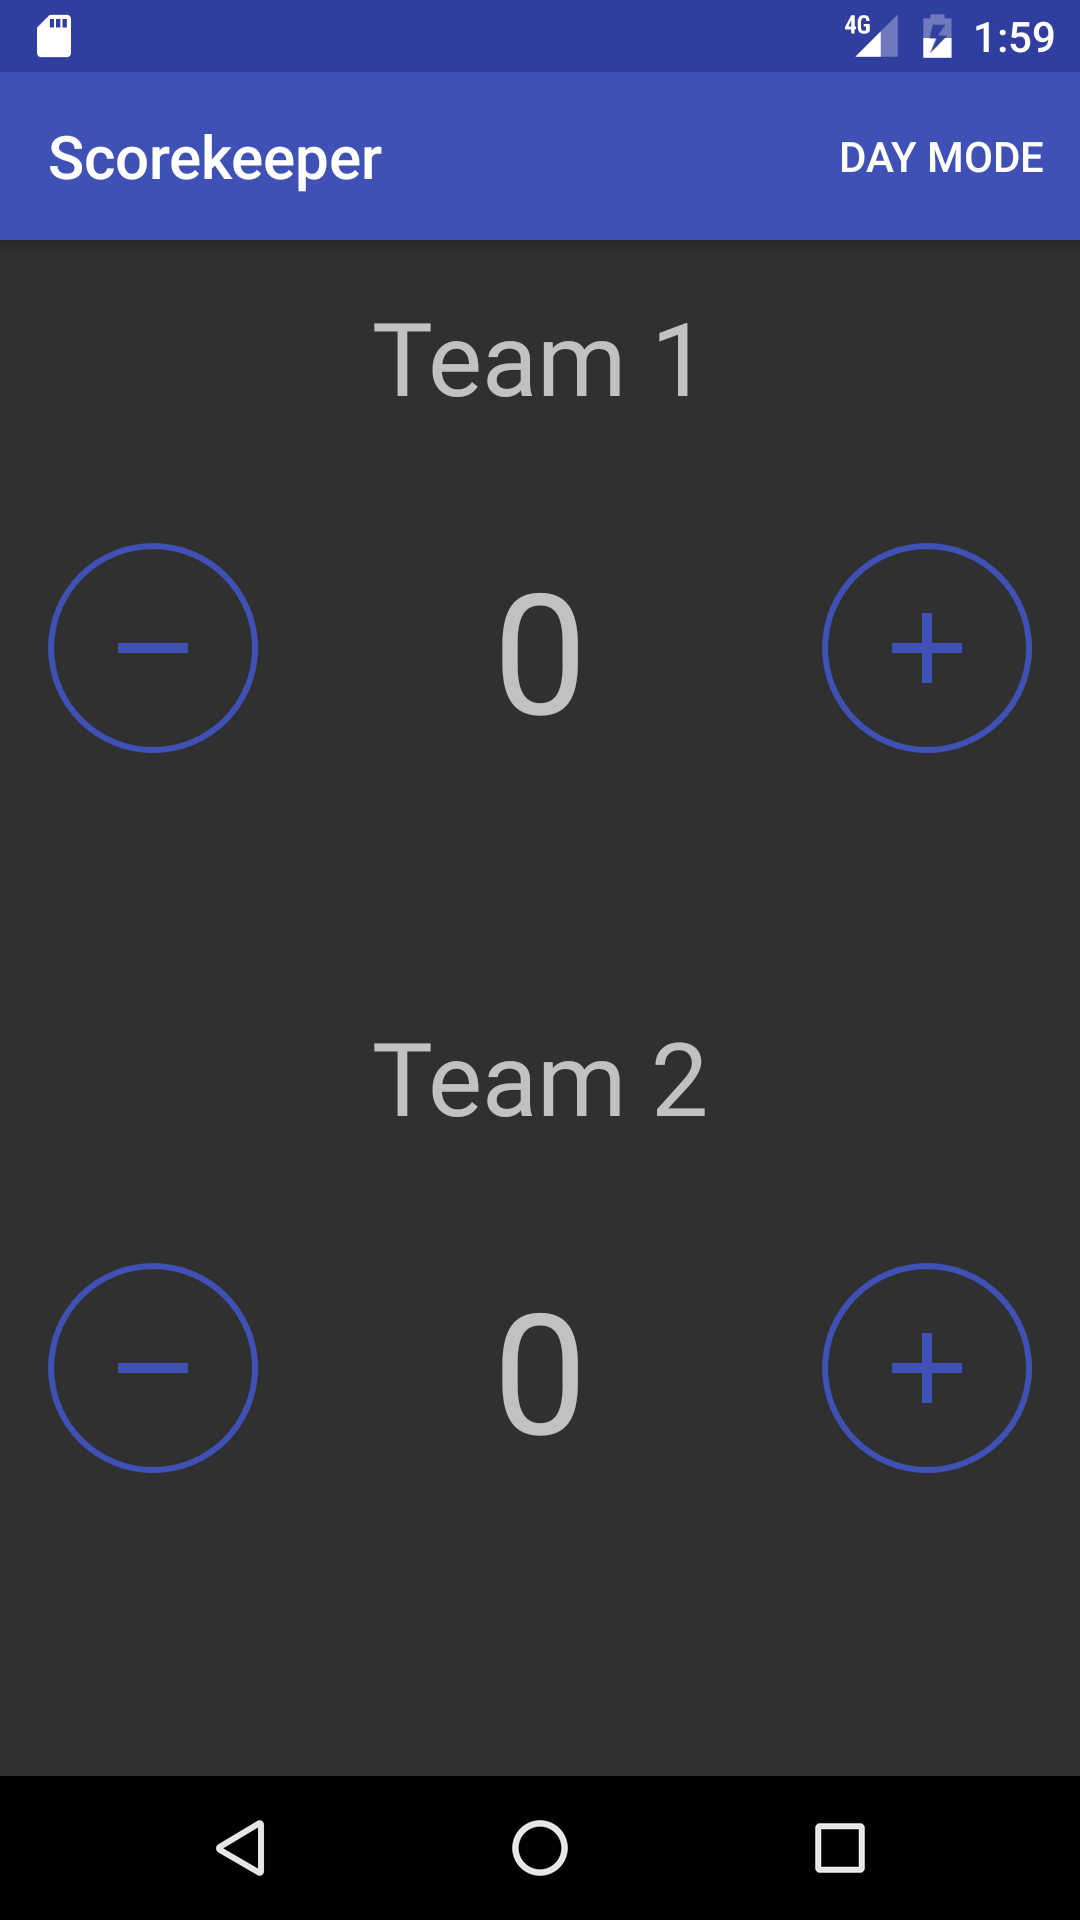 Preview for the Scorekeeper app in Night Mode